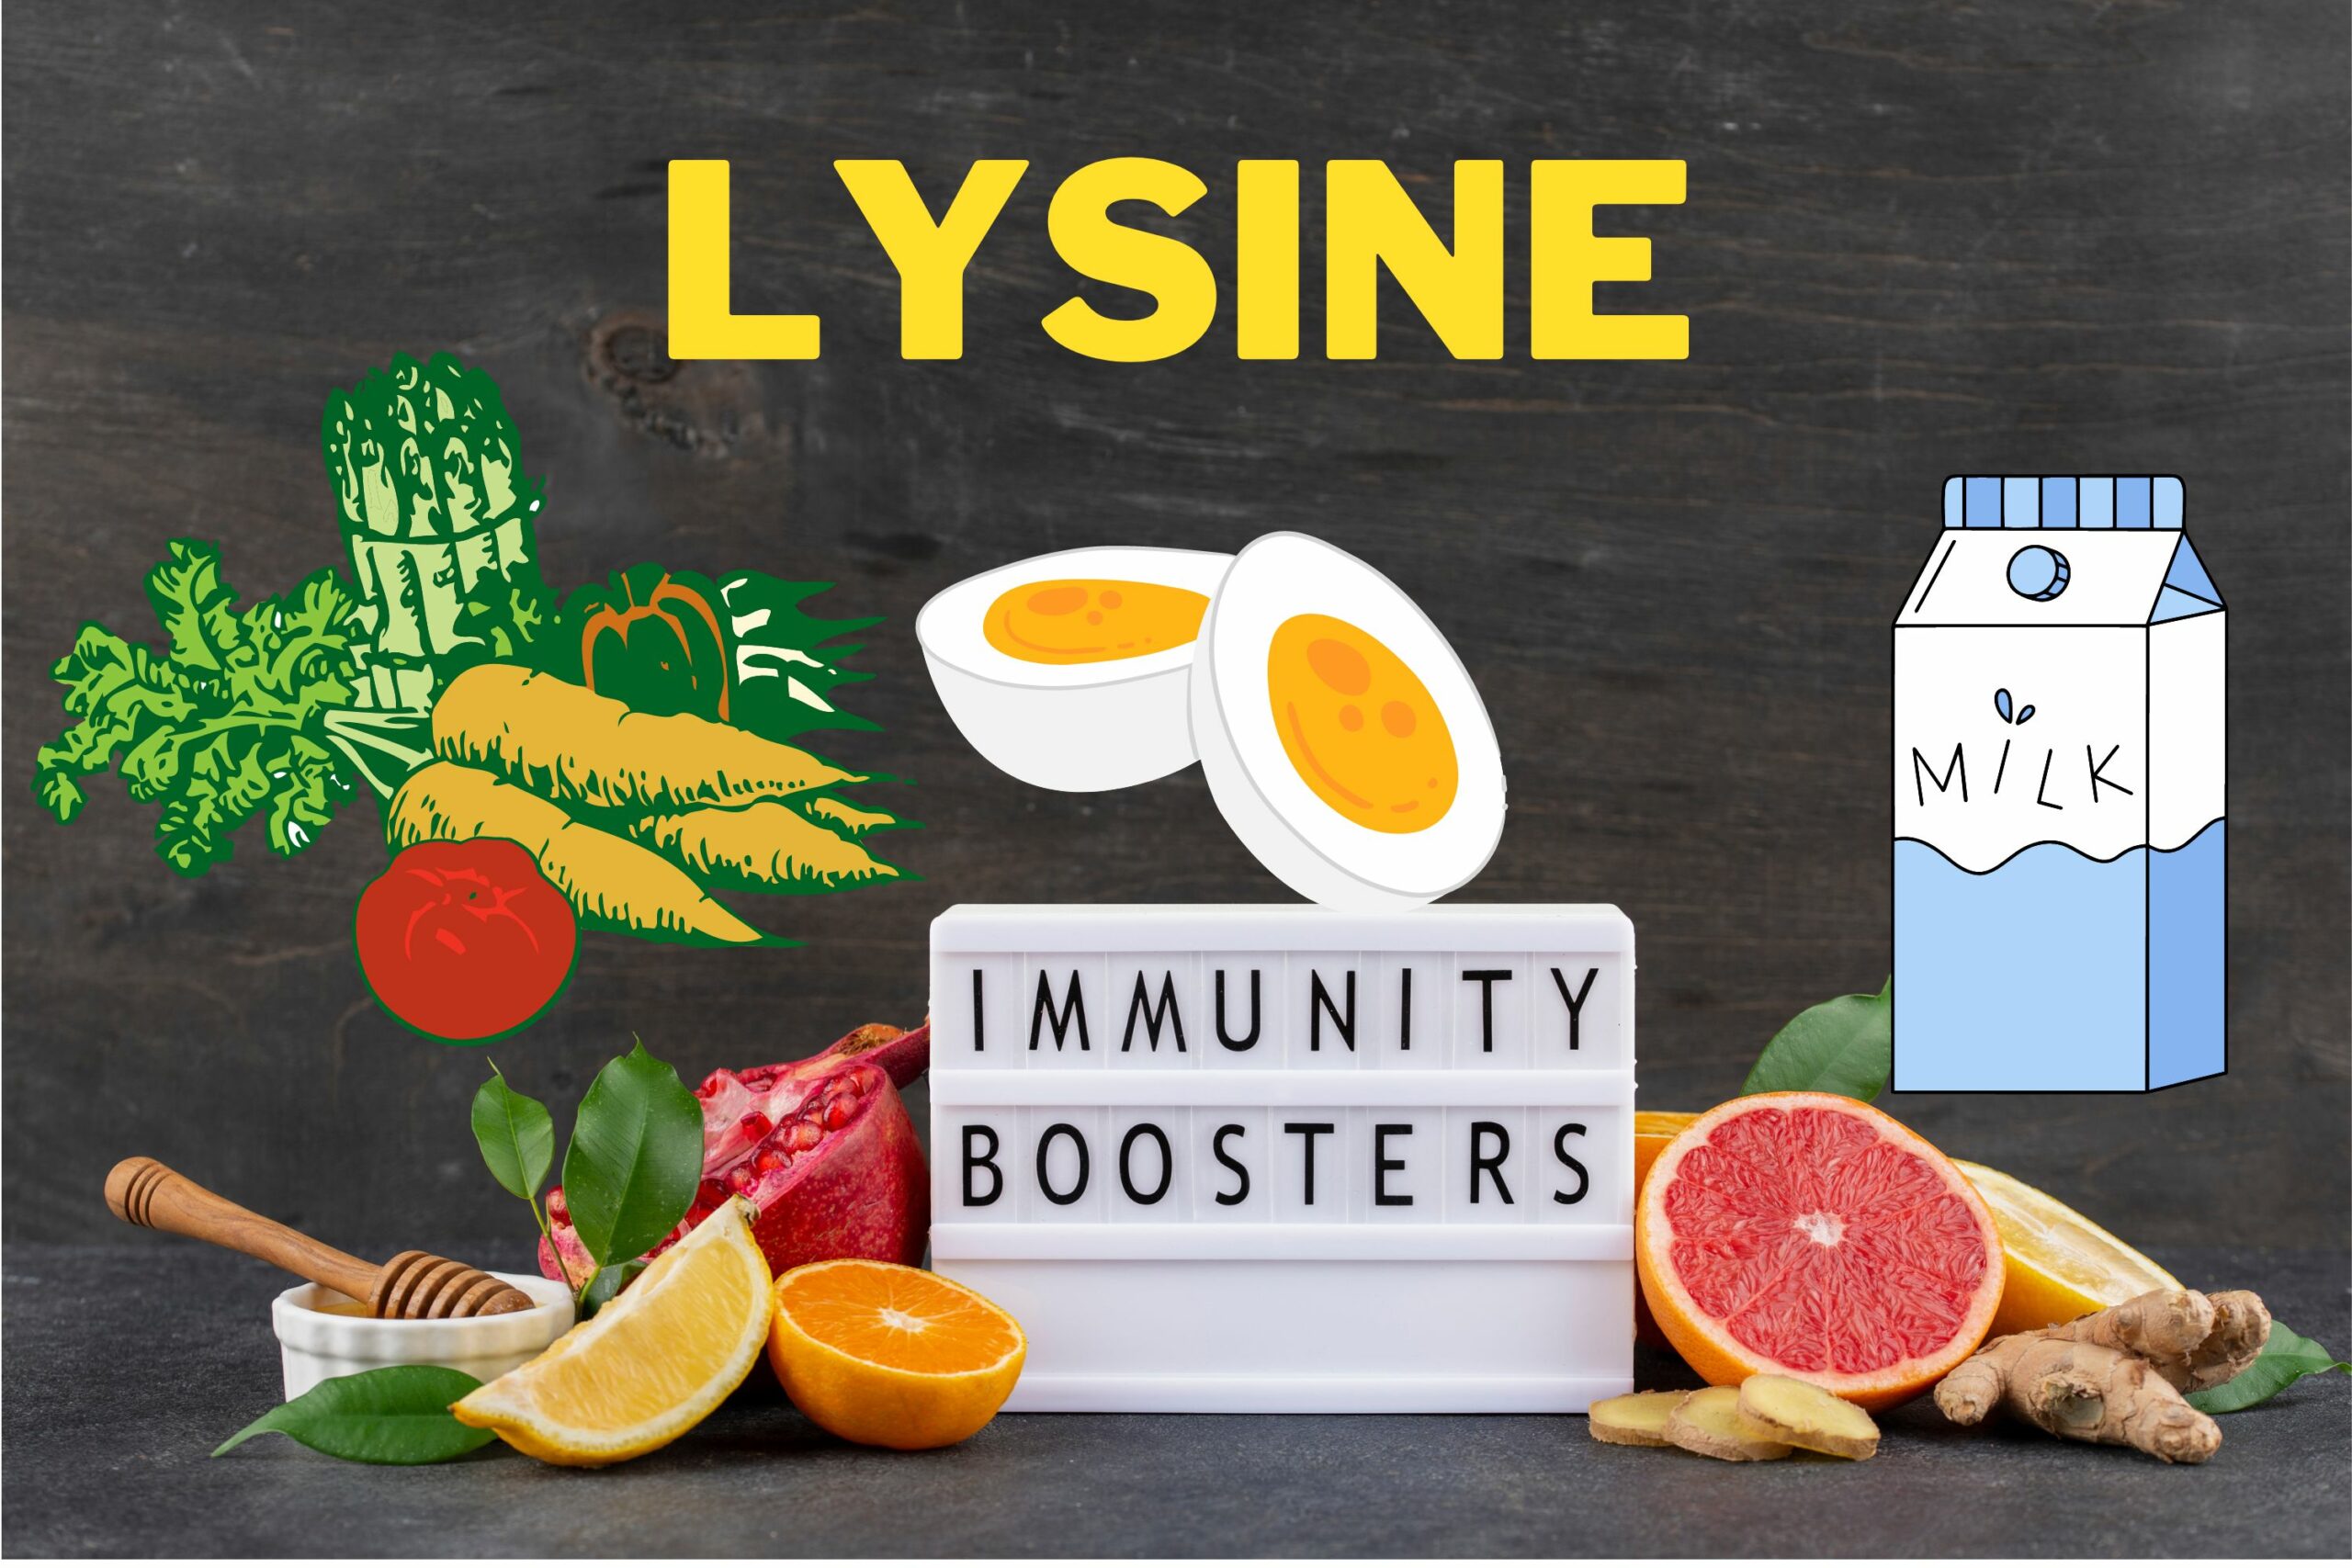 You are currently viewing Looking for a natural way to boost immunity? Try lysine